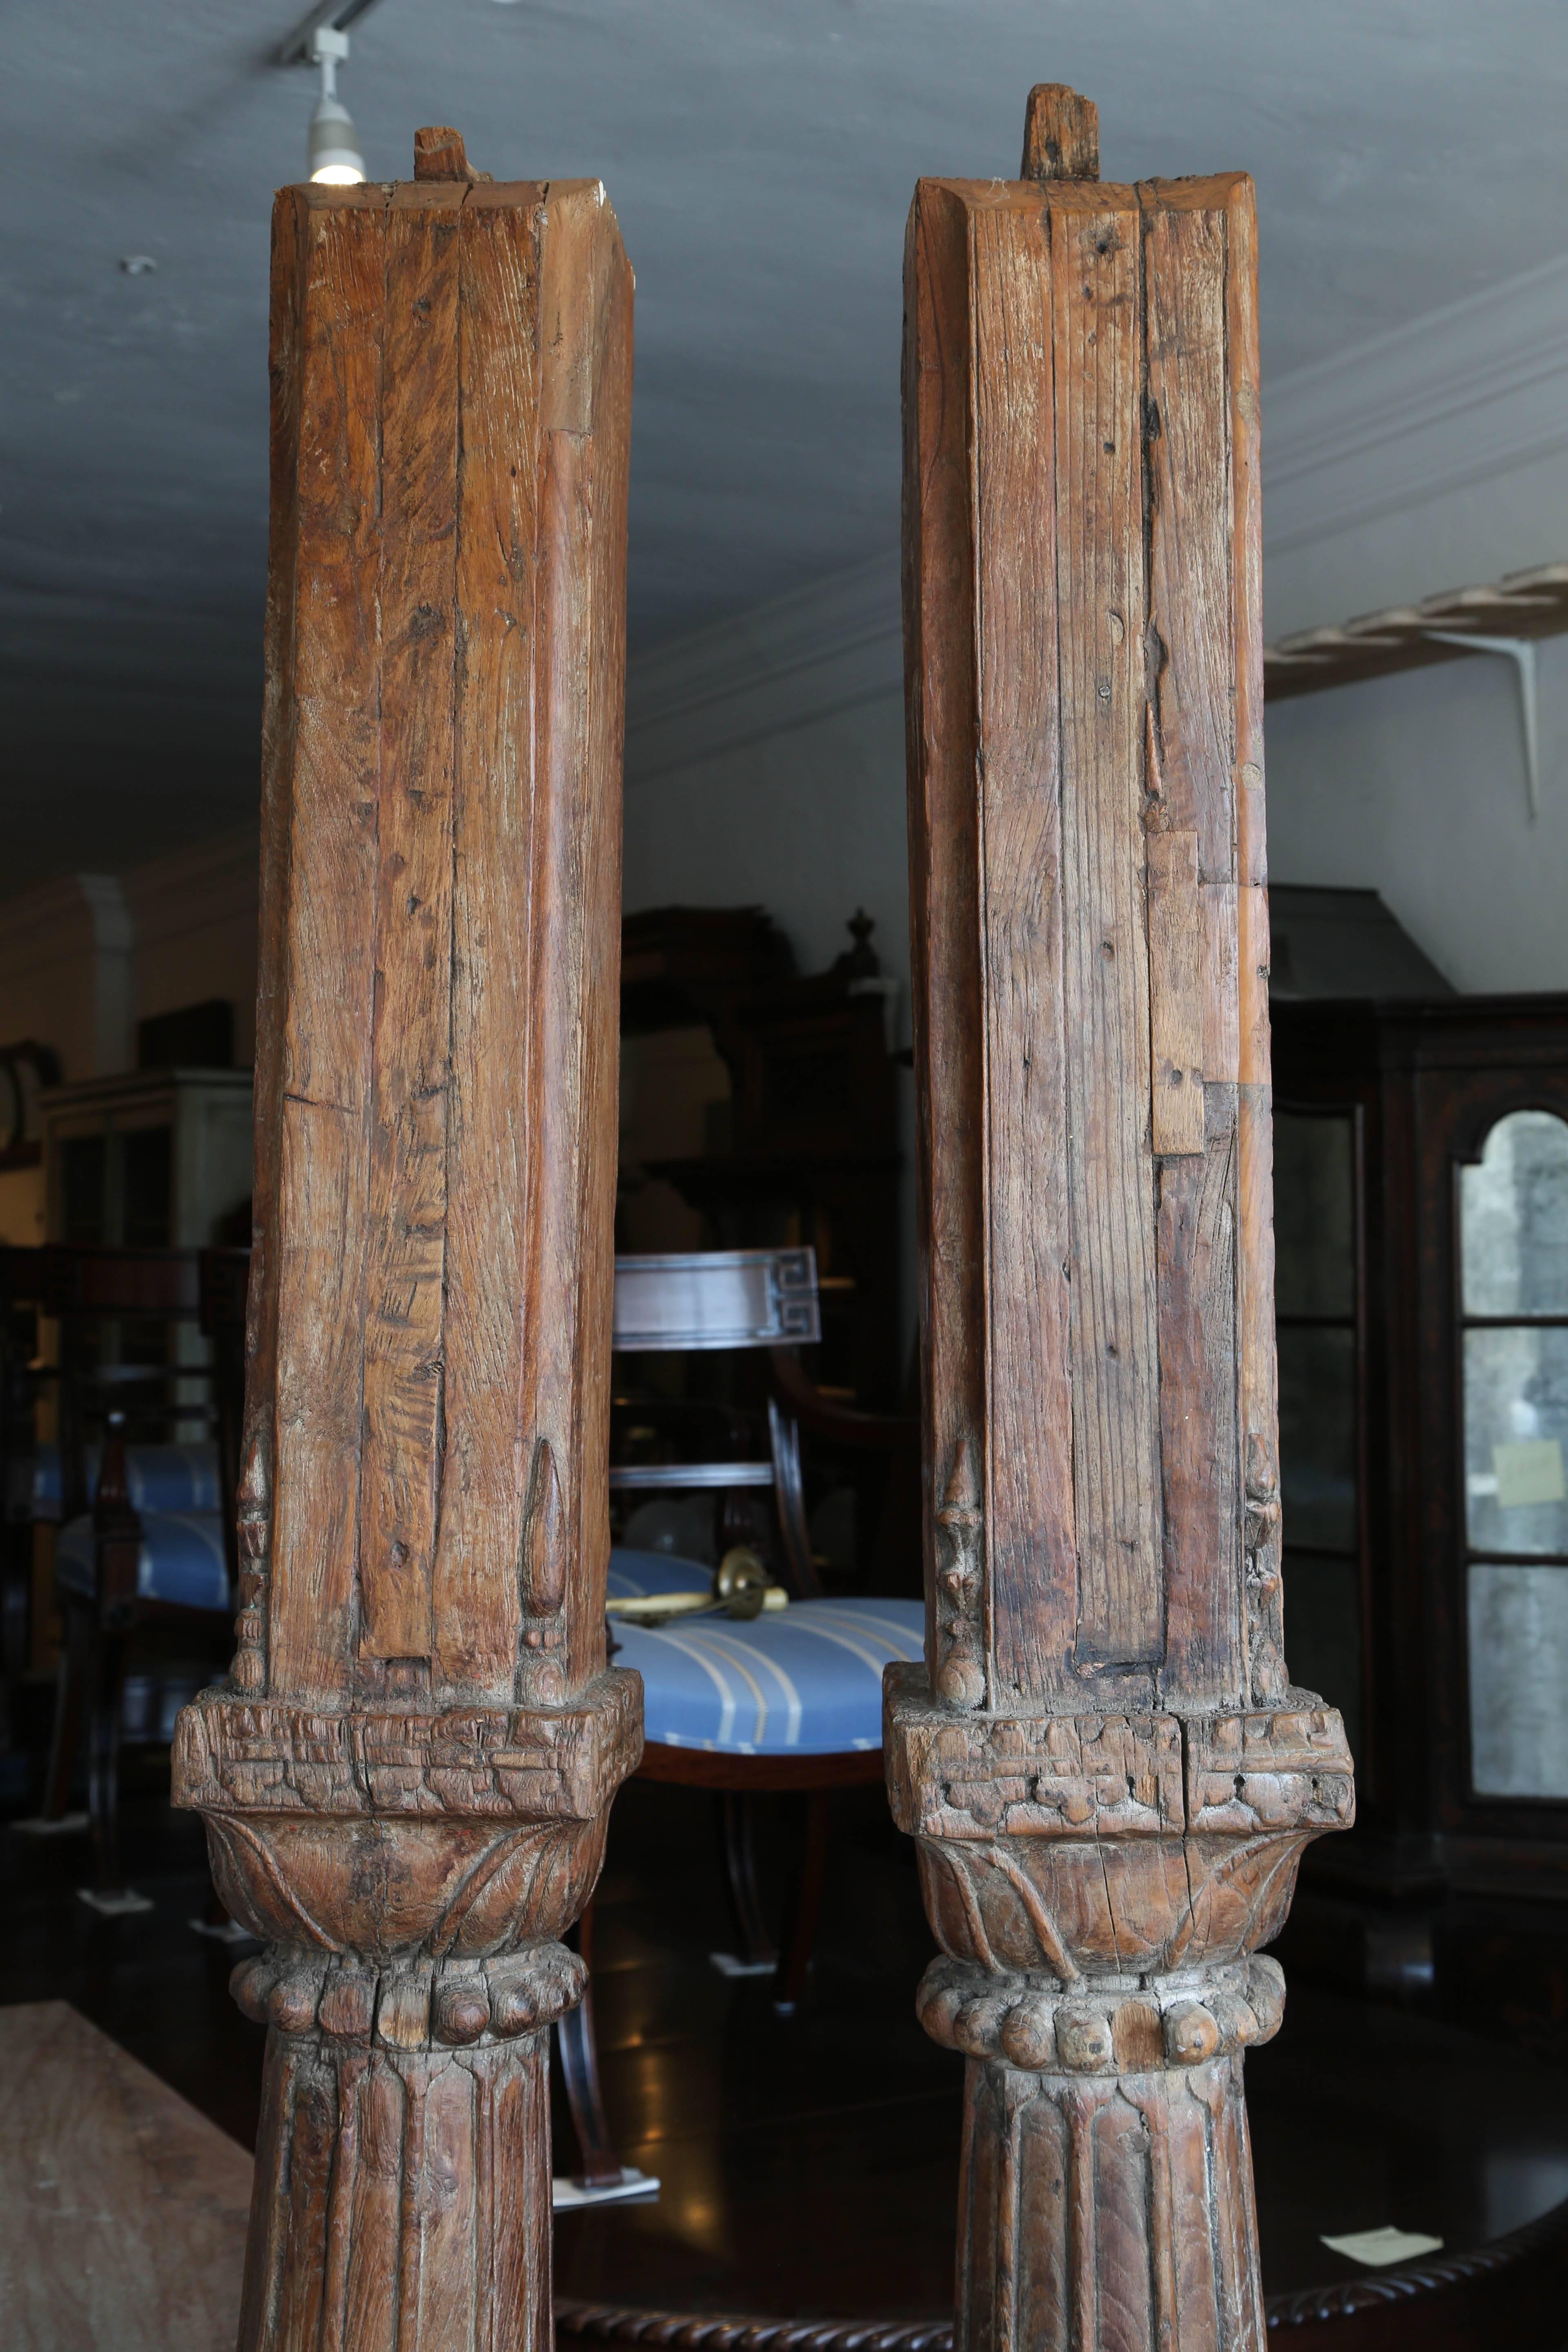 These are very nice pair of antique Wood with stone base pillars or columns.

It looks like they are solid oak with some fine carvings.
There is a cut out to one side with a lip to the top, which makes me believe it could have been an entrance at